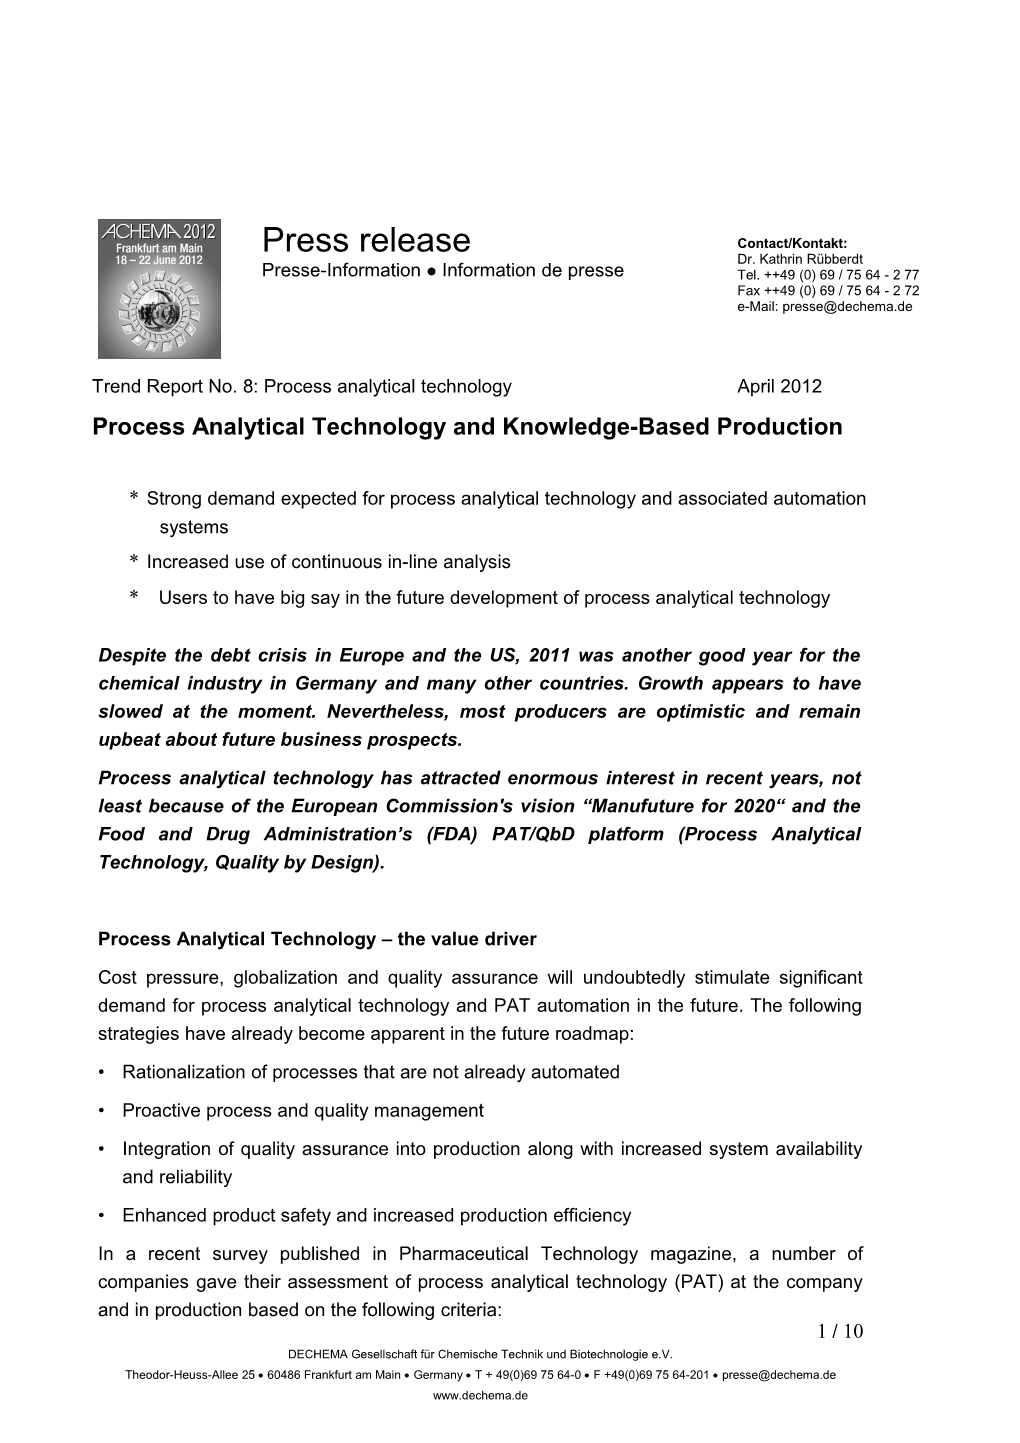 Process Analytical Technology the Value Driver